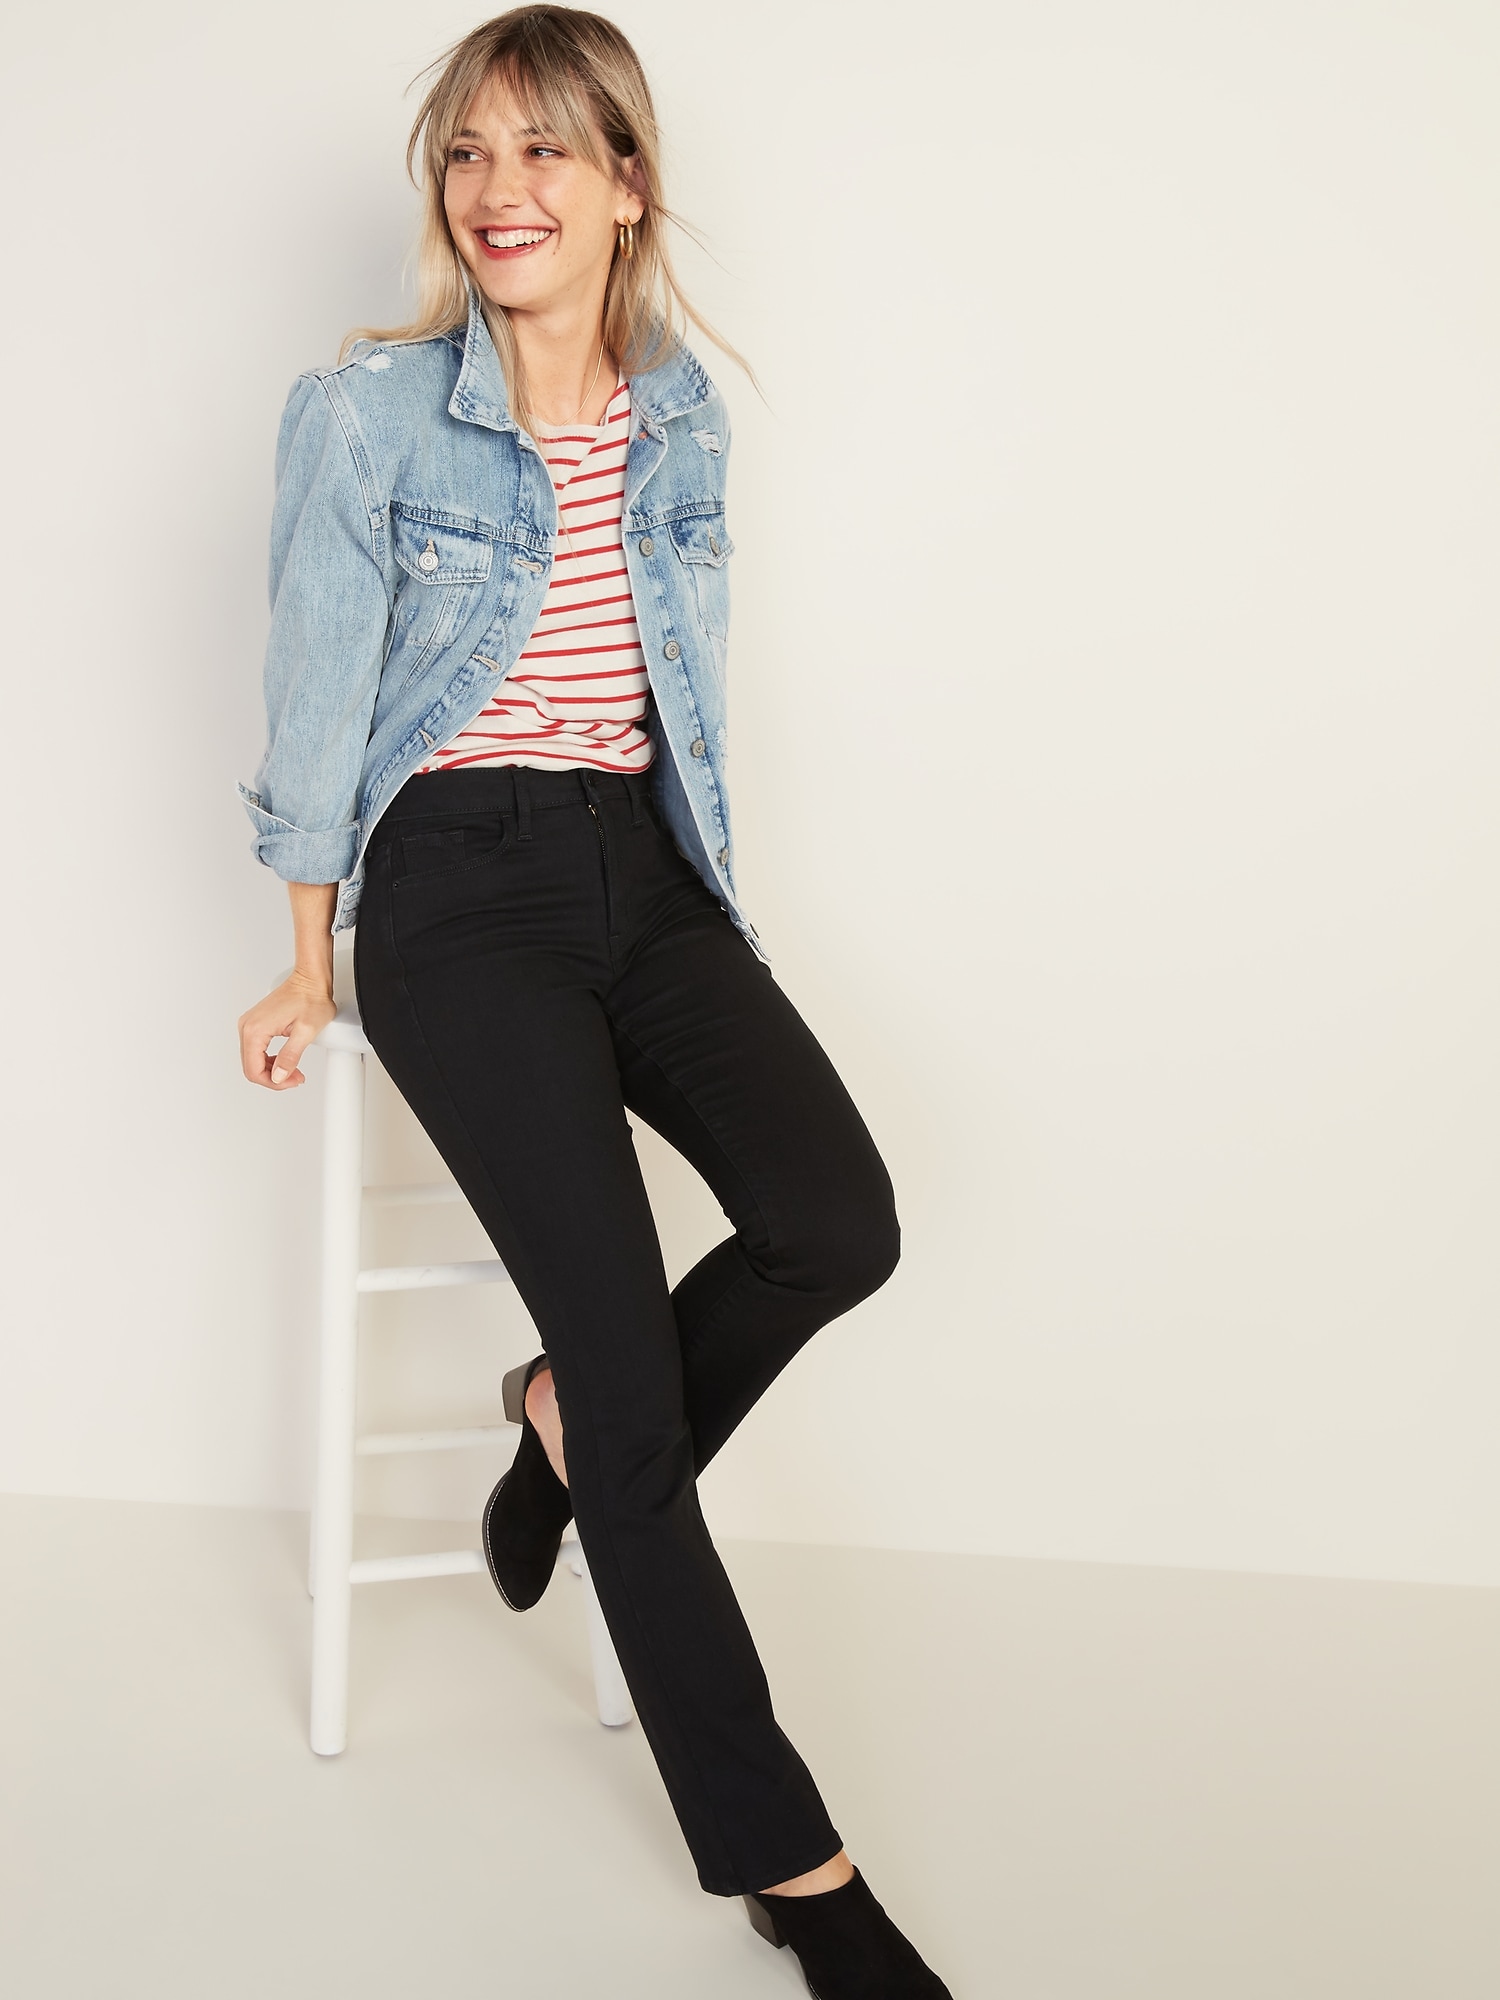 Buy > women's black high rise bootcut jeans > in stock